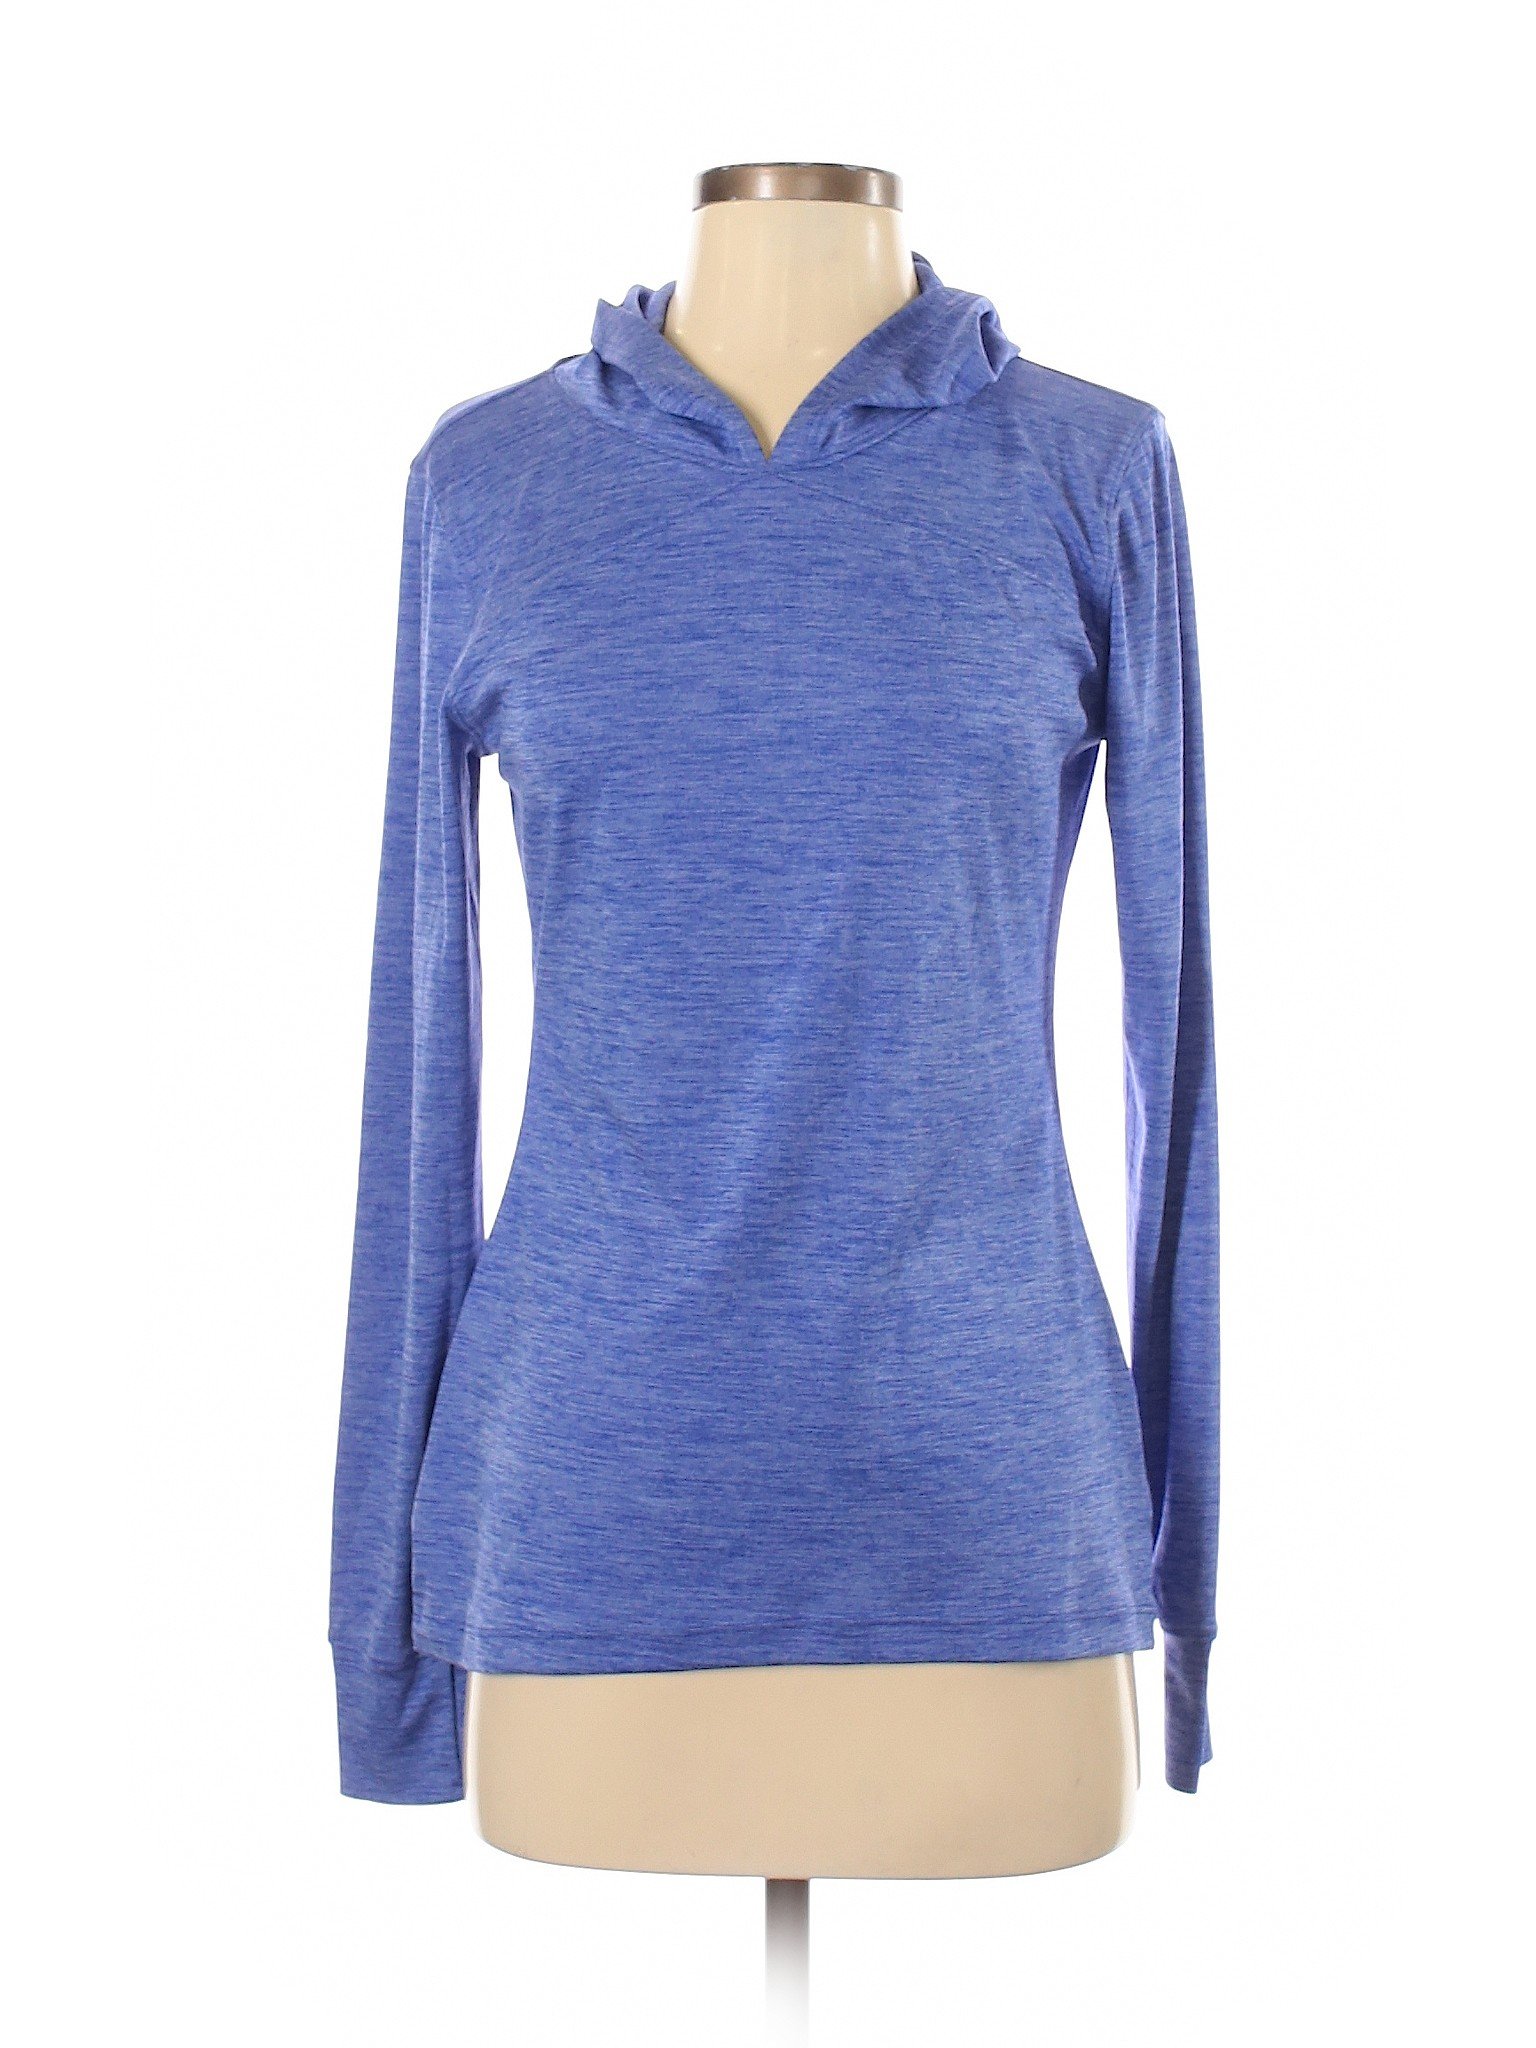 Active by Old Navy Women Blue Pullover Hoodie S | eBay